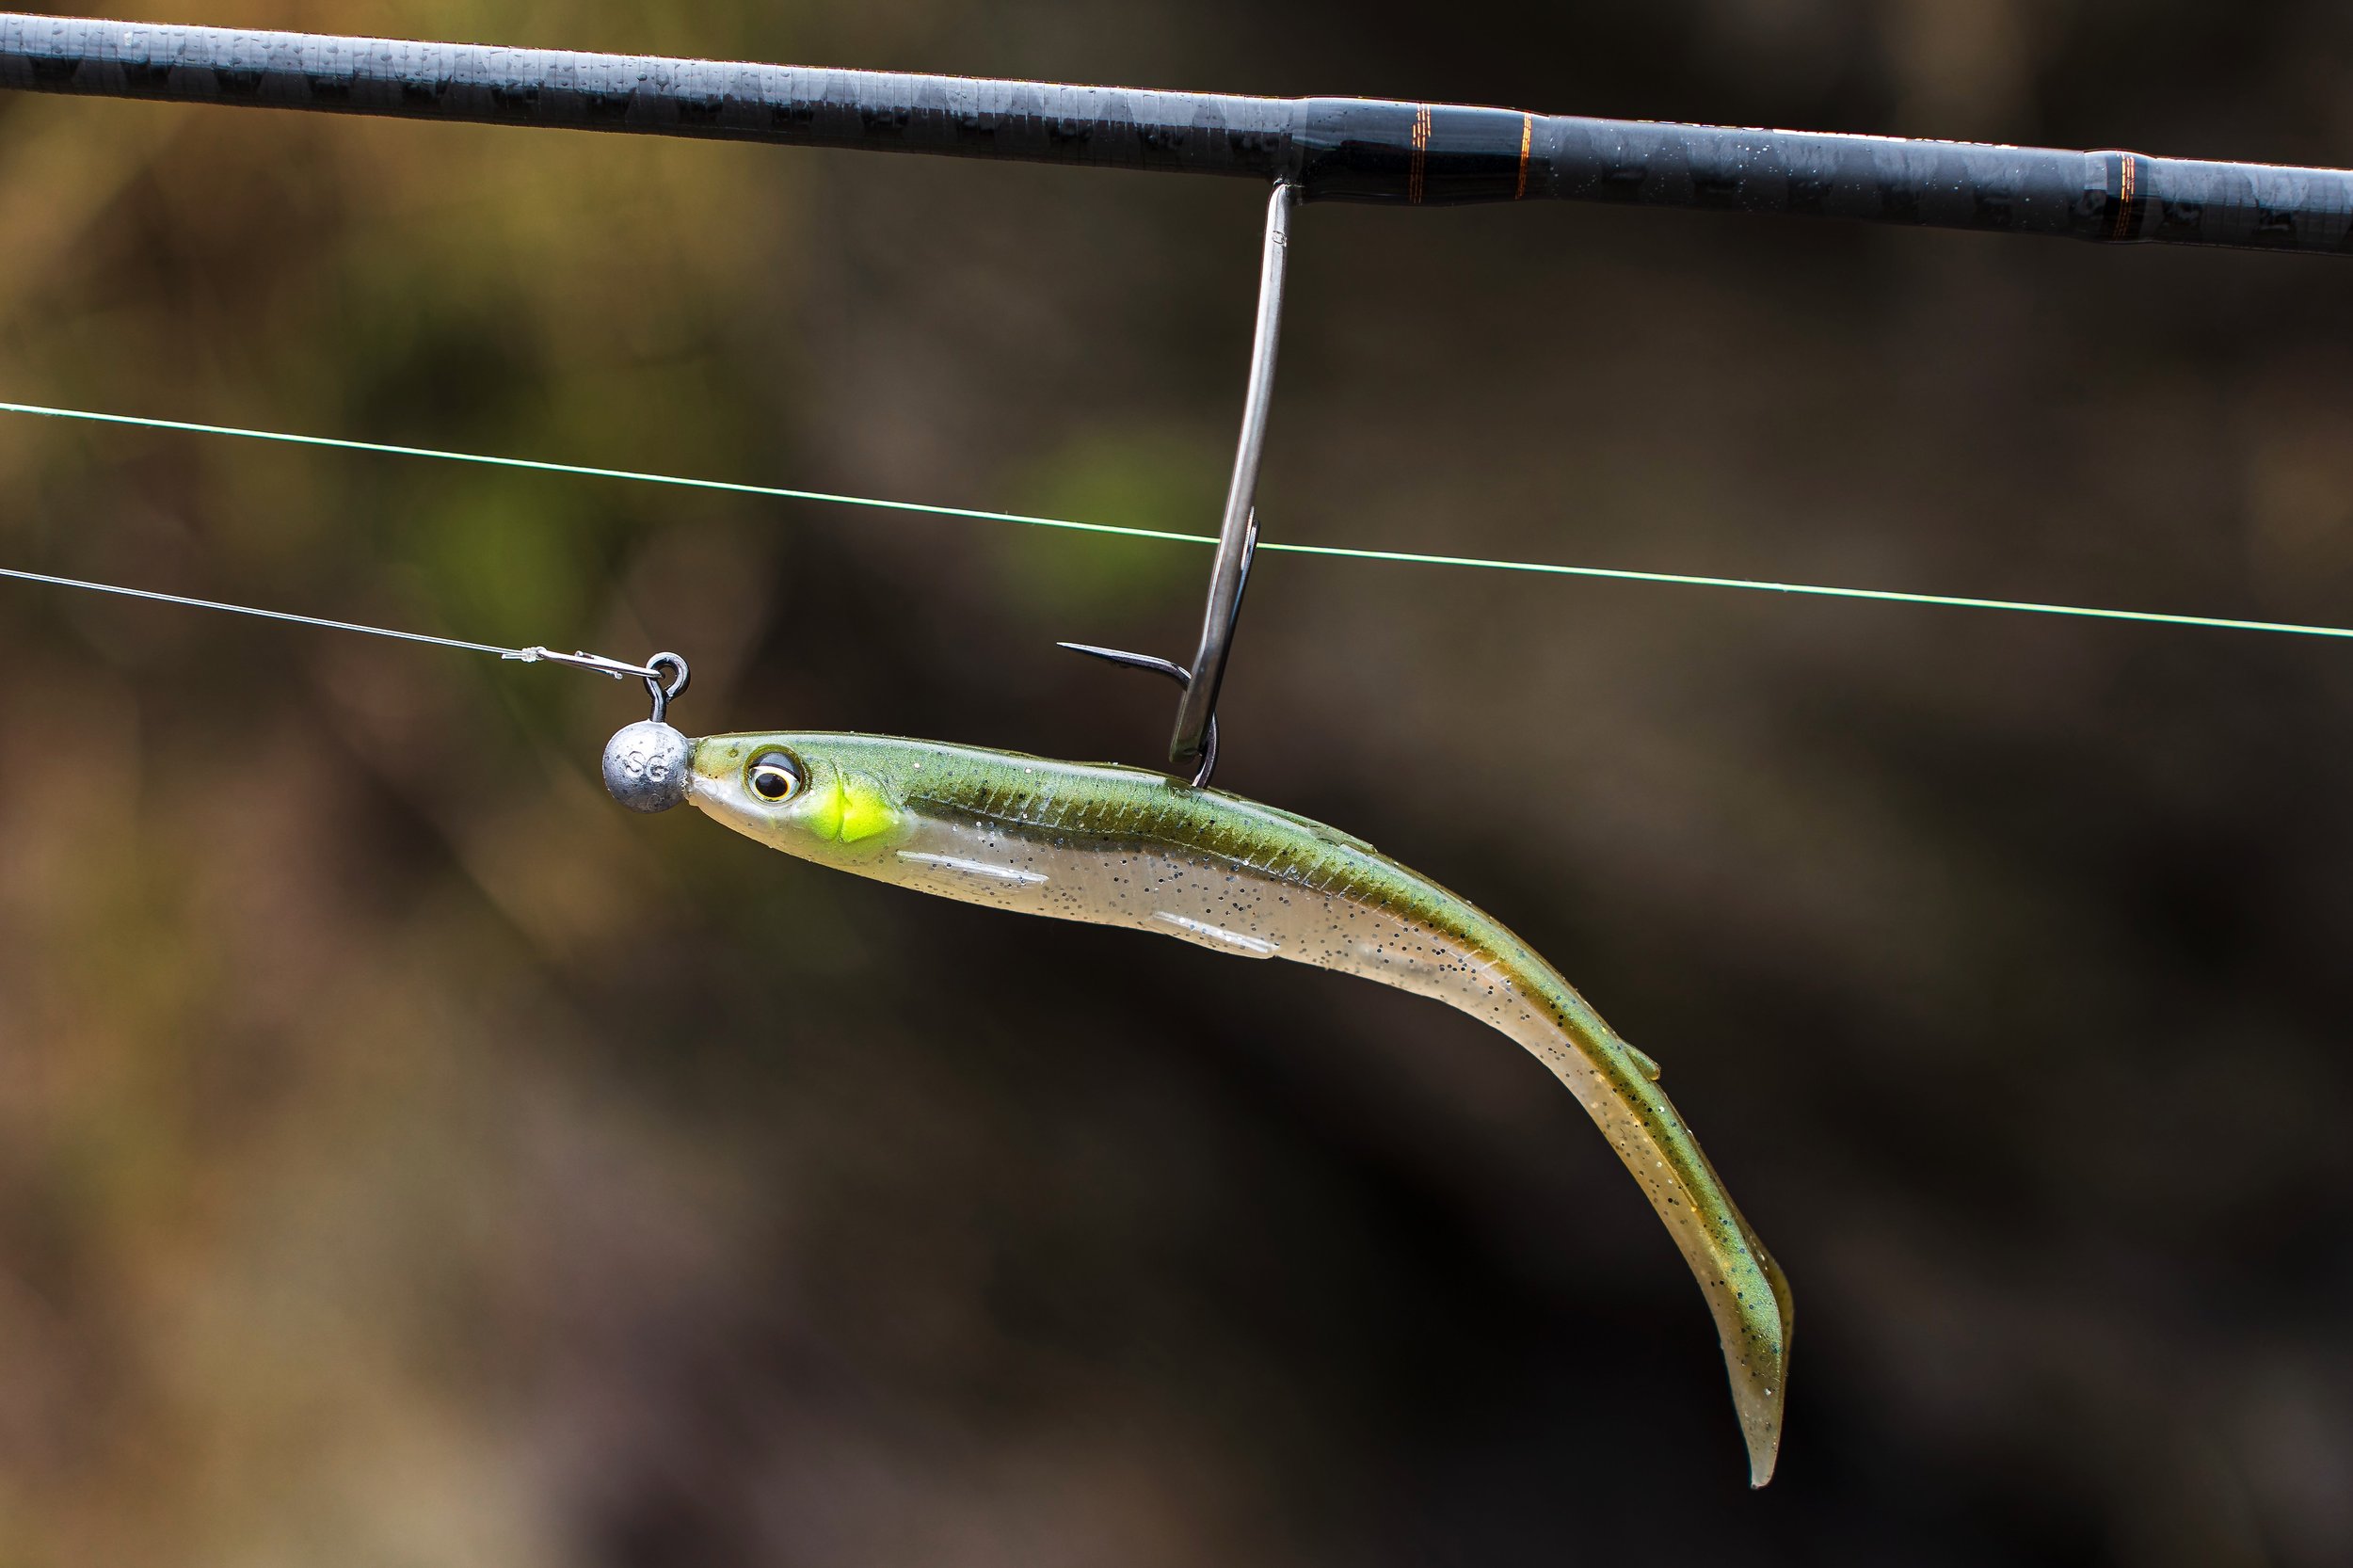 Casts well, swims well, bumps well, but is this style of rigging going to  effectively hook fish? — Henry Gilbey